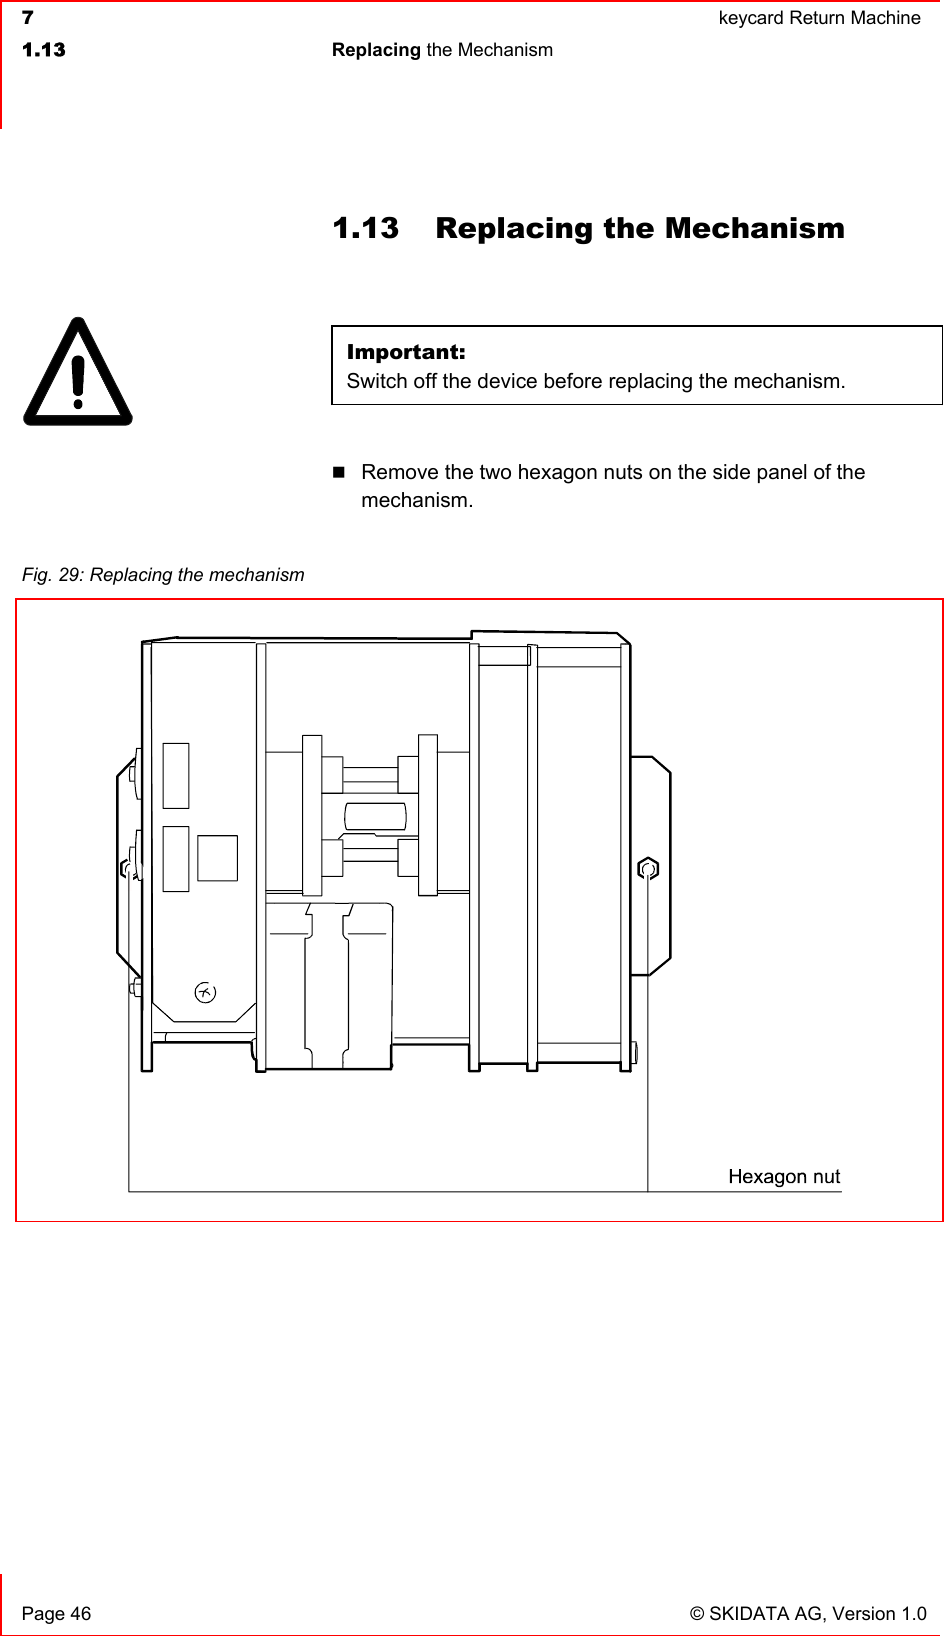  7  keycard Return Machine1.13 Replacing the Mechanism   Page 46  © SKIDATA AG, Version 1.0 1.13  Replacing the Mechanism Important:Switch off the device before replacing the mechanism. Remove the two hexagon nuts on the side panel of the mechanism.Fig. 29: Replacing the mechanism 